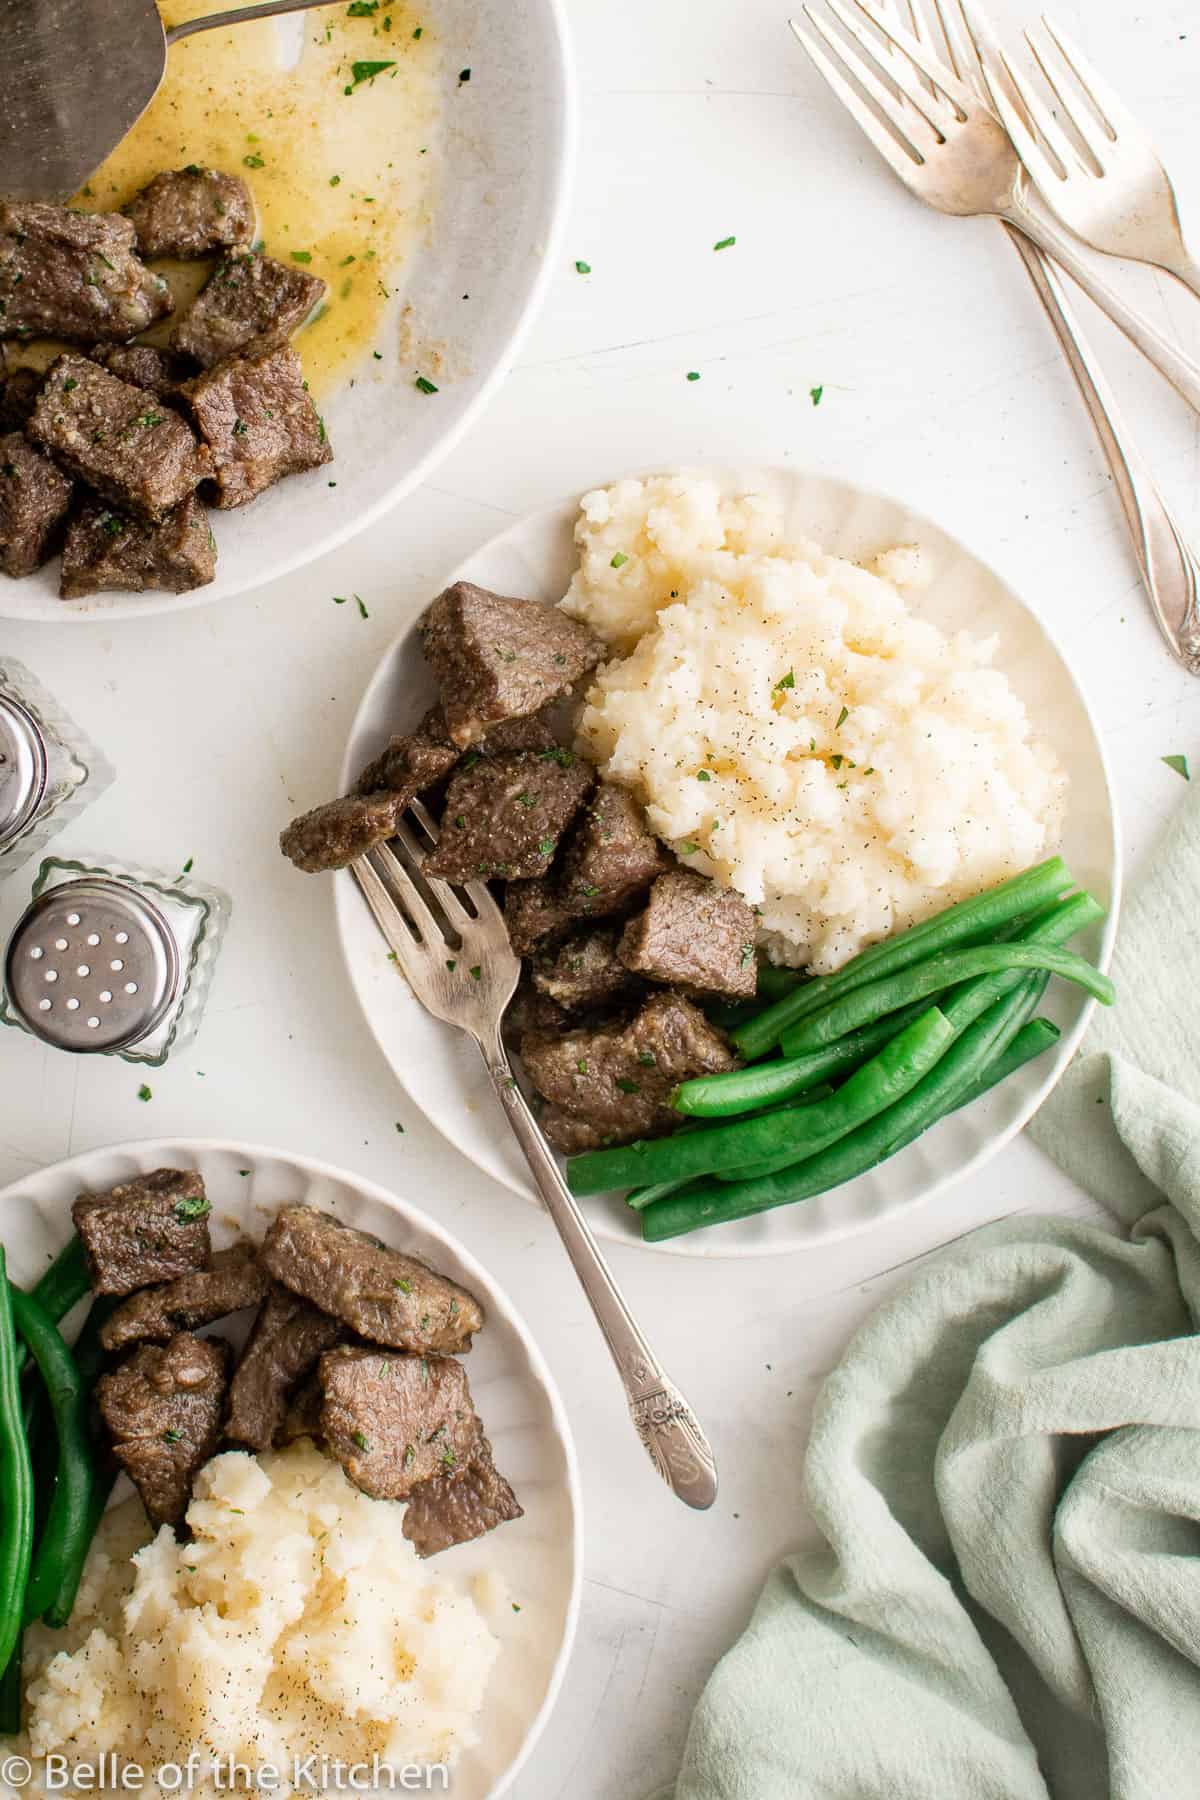 plates with mashed potatoes, green beans, and steak